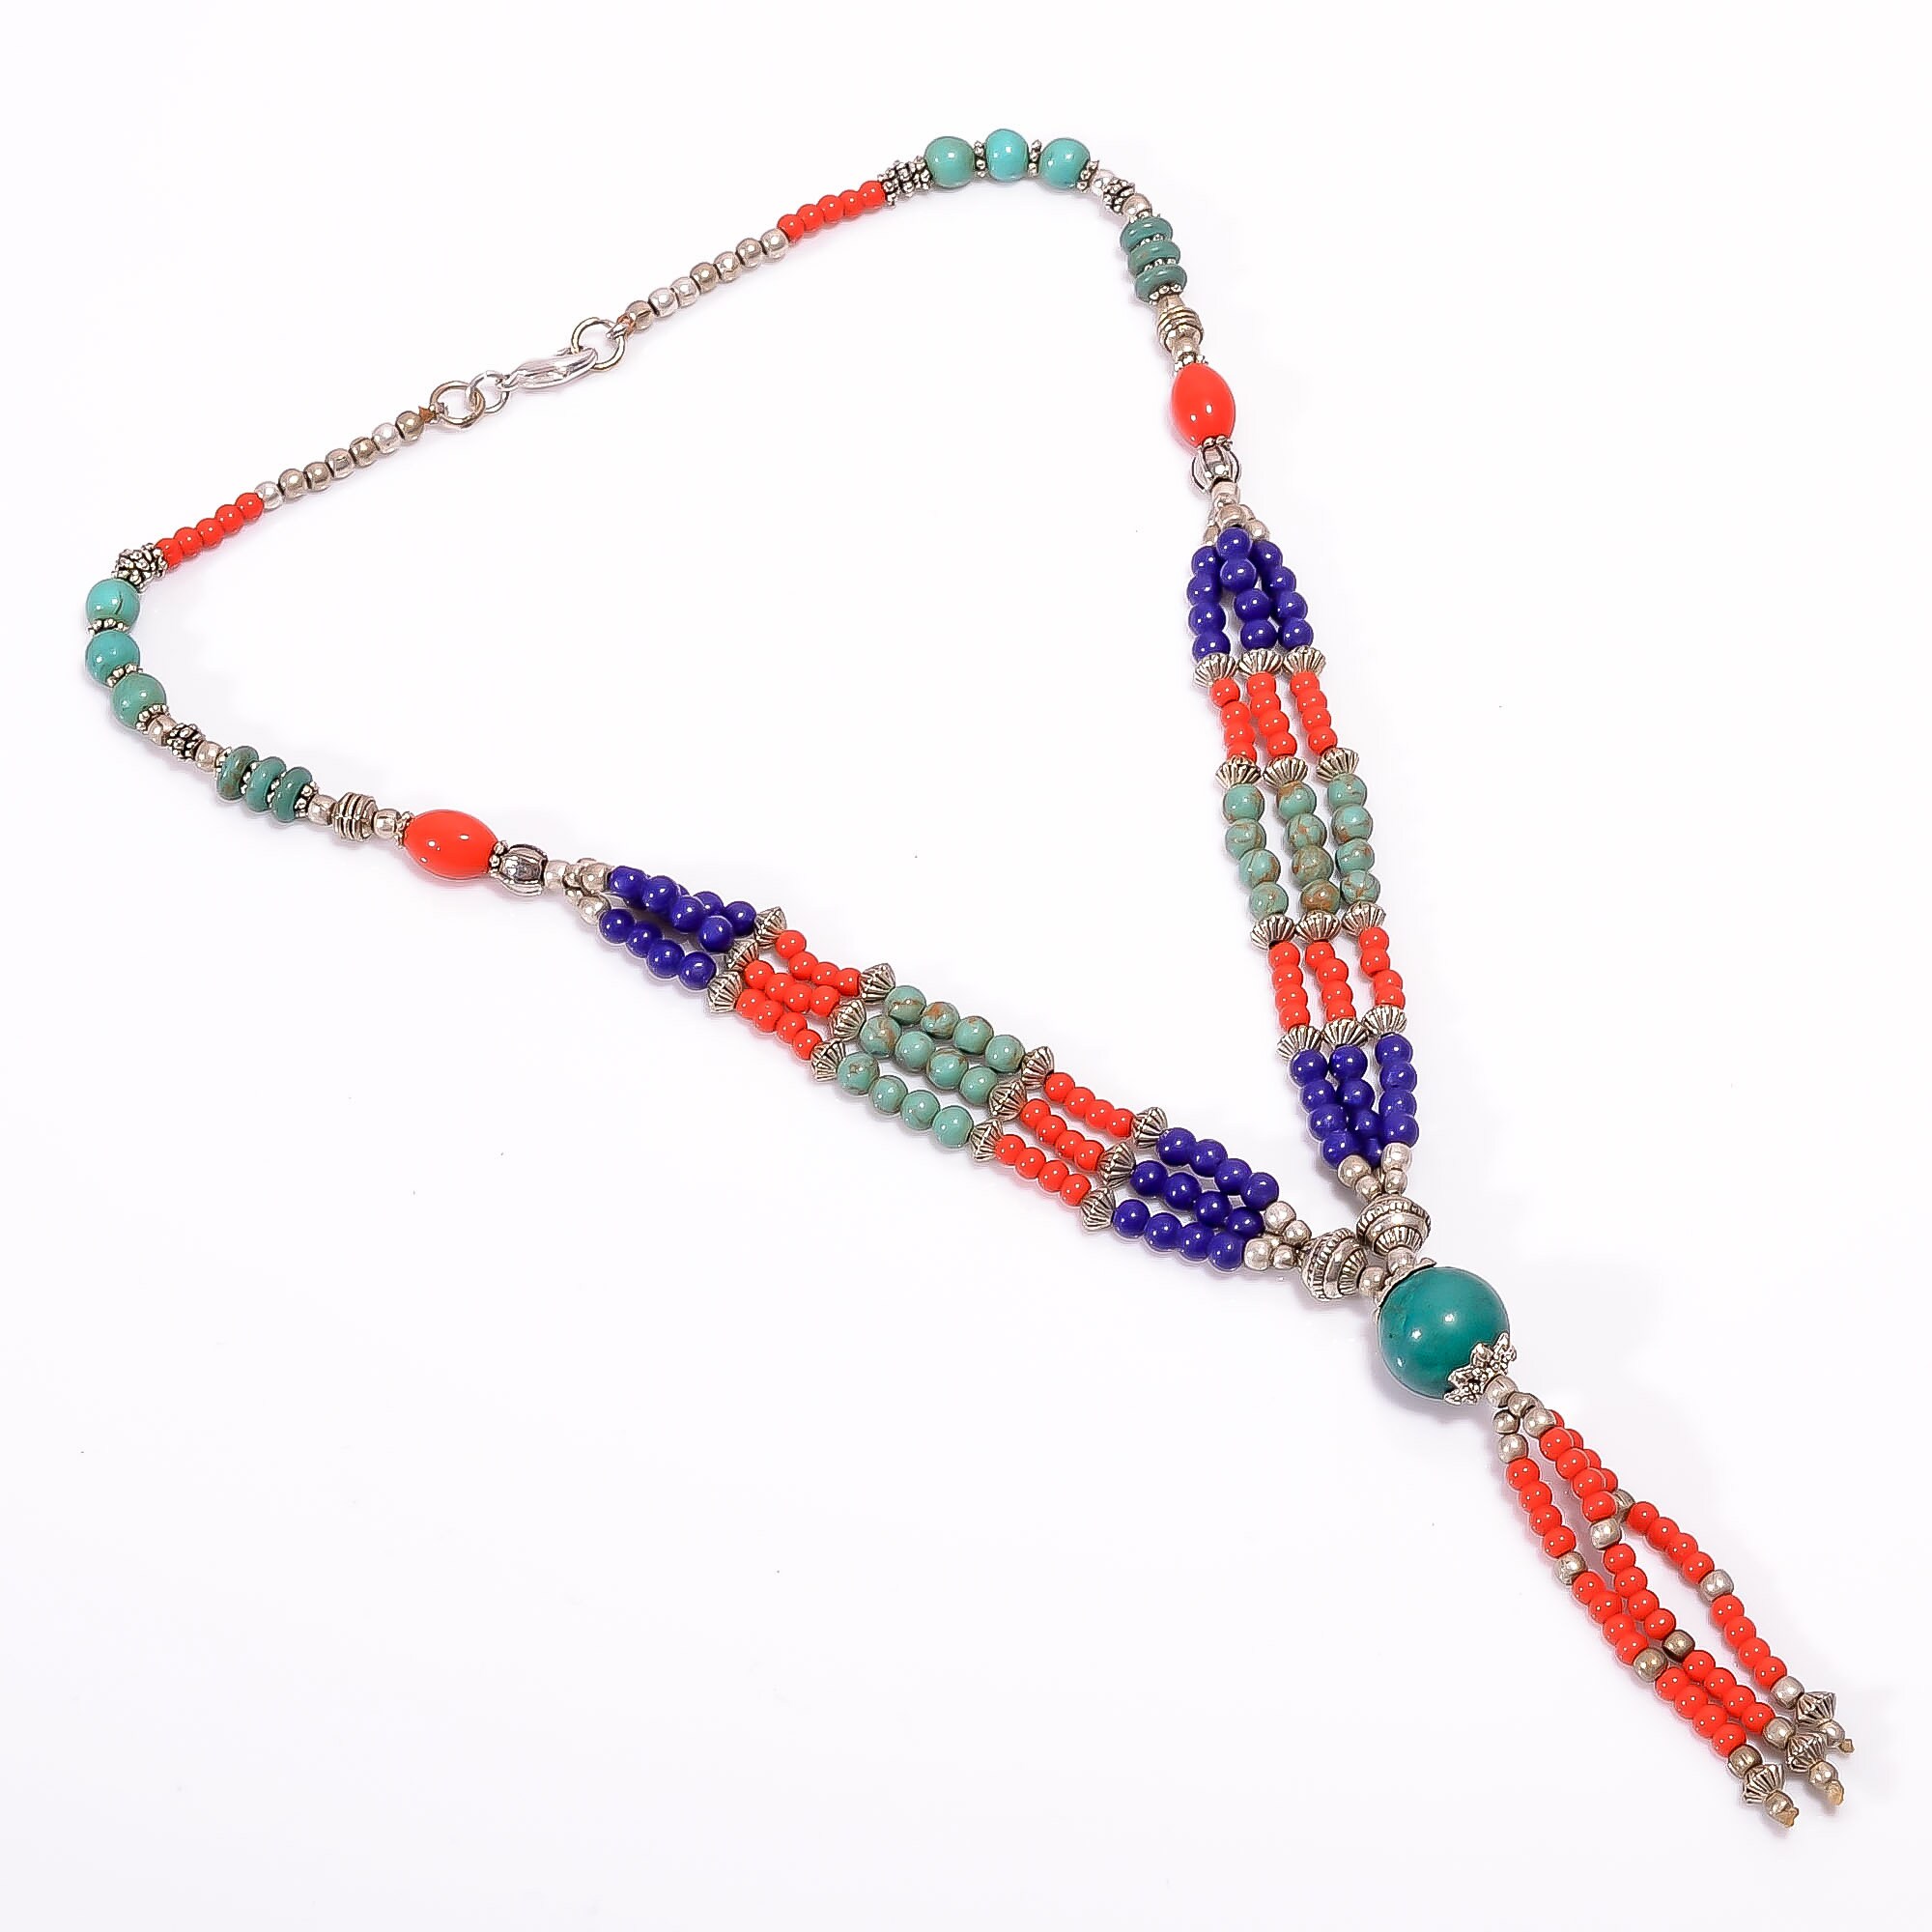 Ethnic Tibetan Handmade Necklace with Turquoise Lapis /& Coral Inlays Bohemian Necklace Handmade Necklace